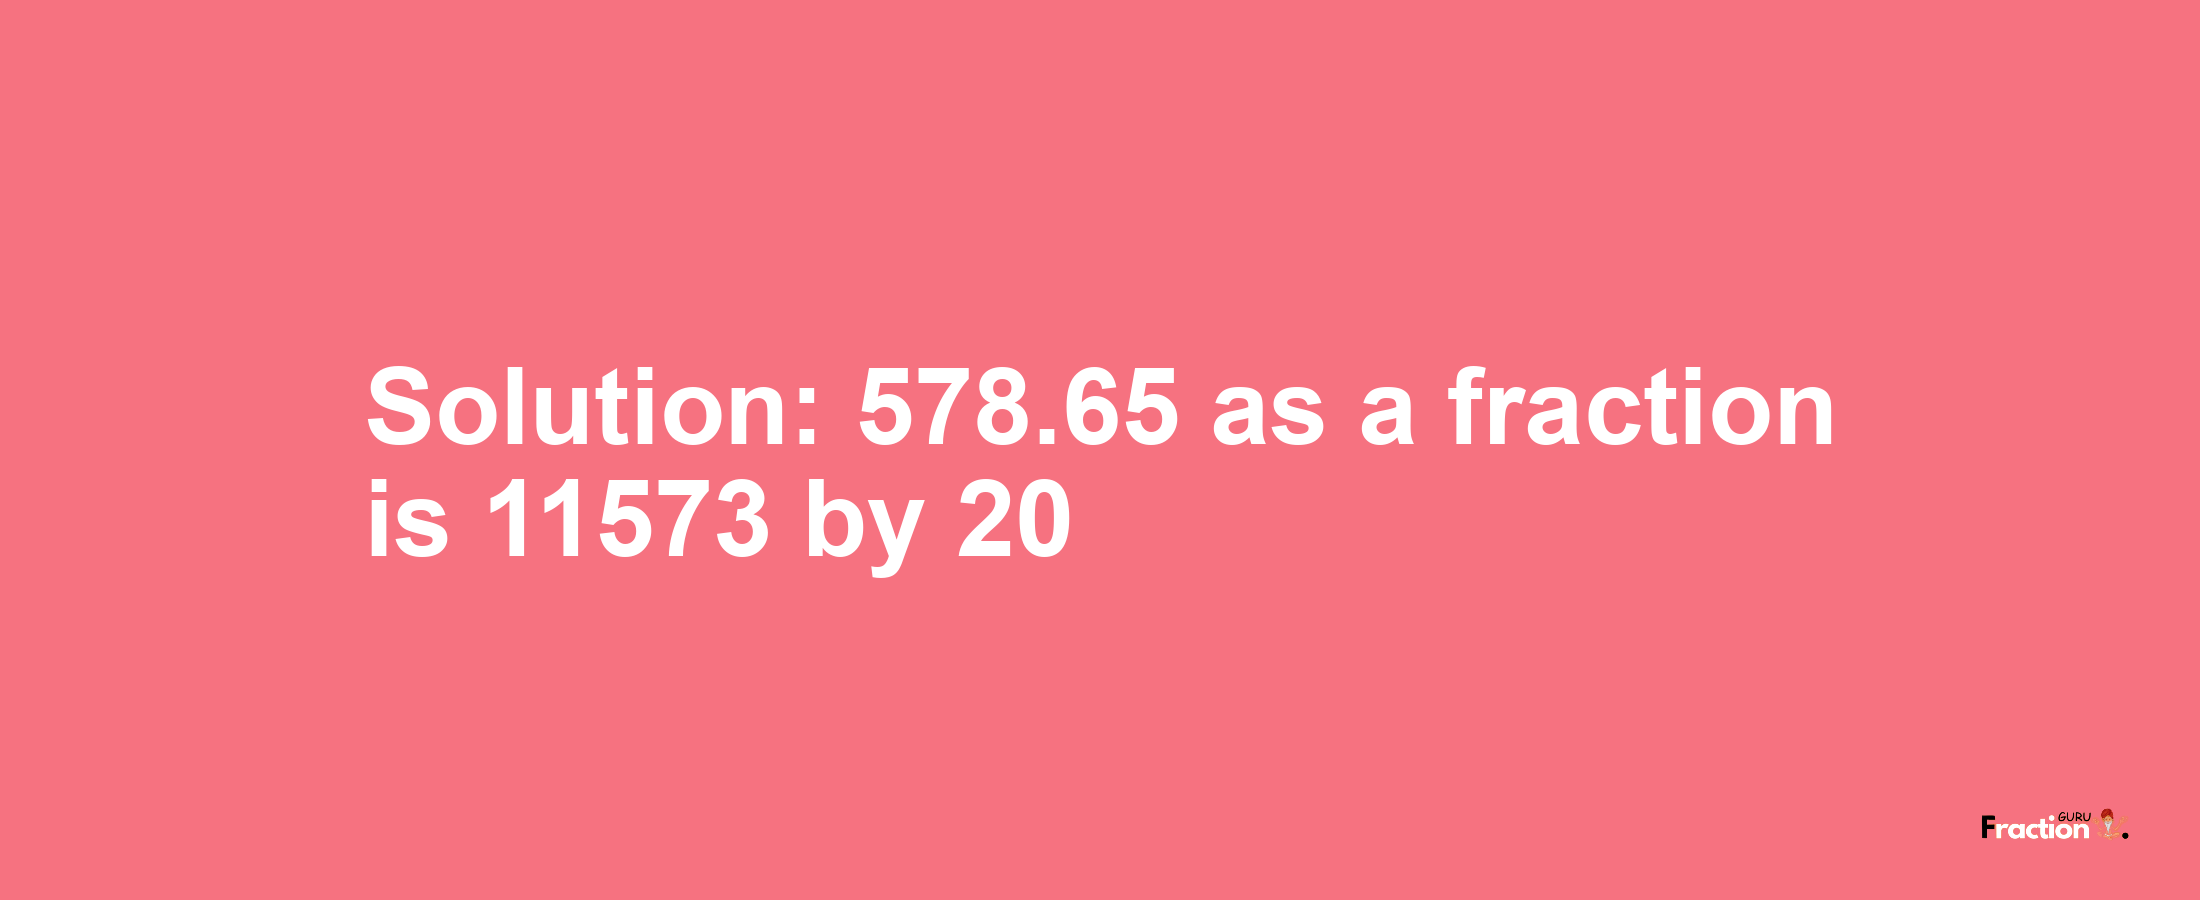 Solution:578.65 as a fraction is 11573/20